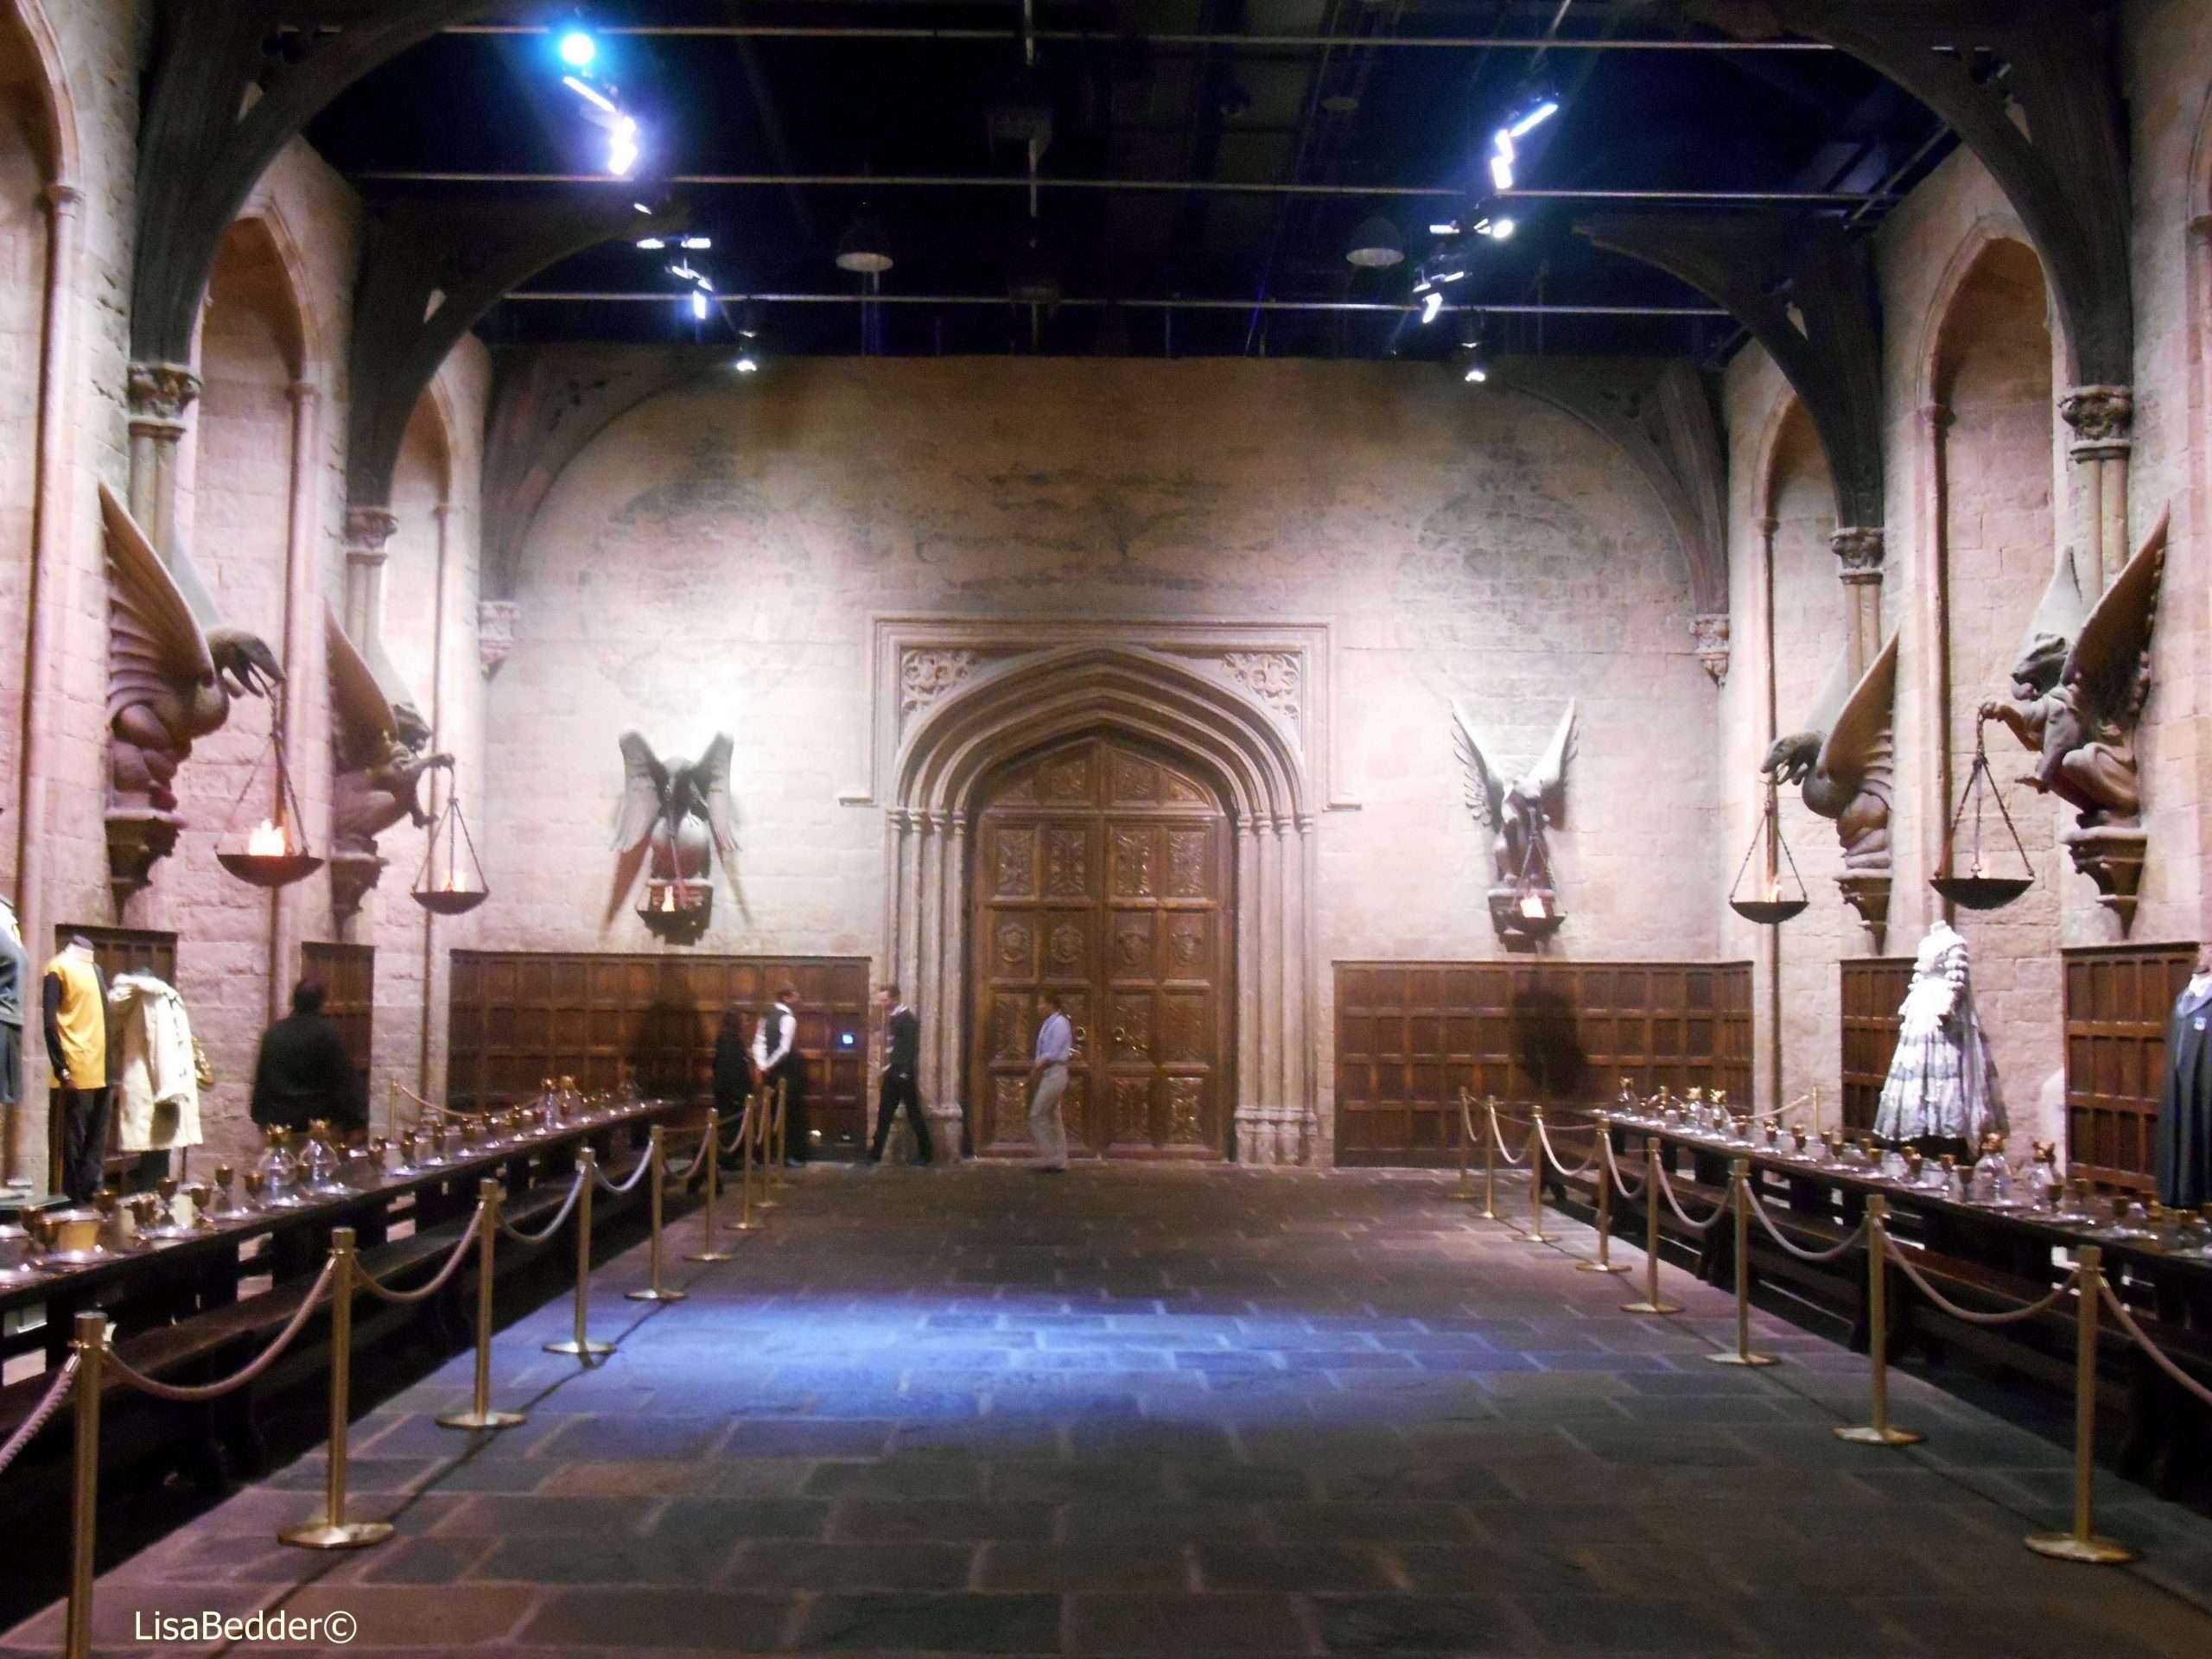 The great hall on the Harry Potter Movie set.